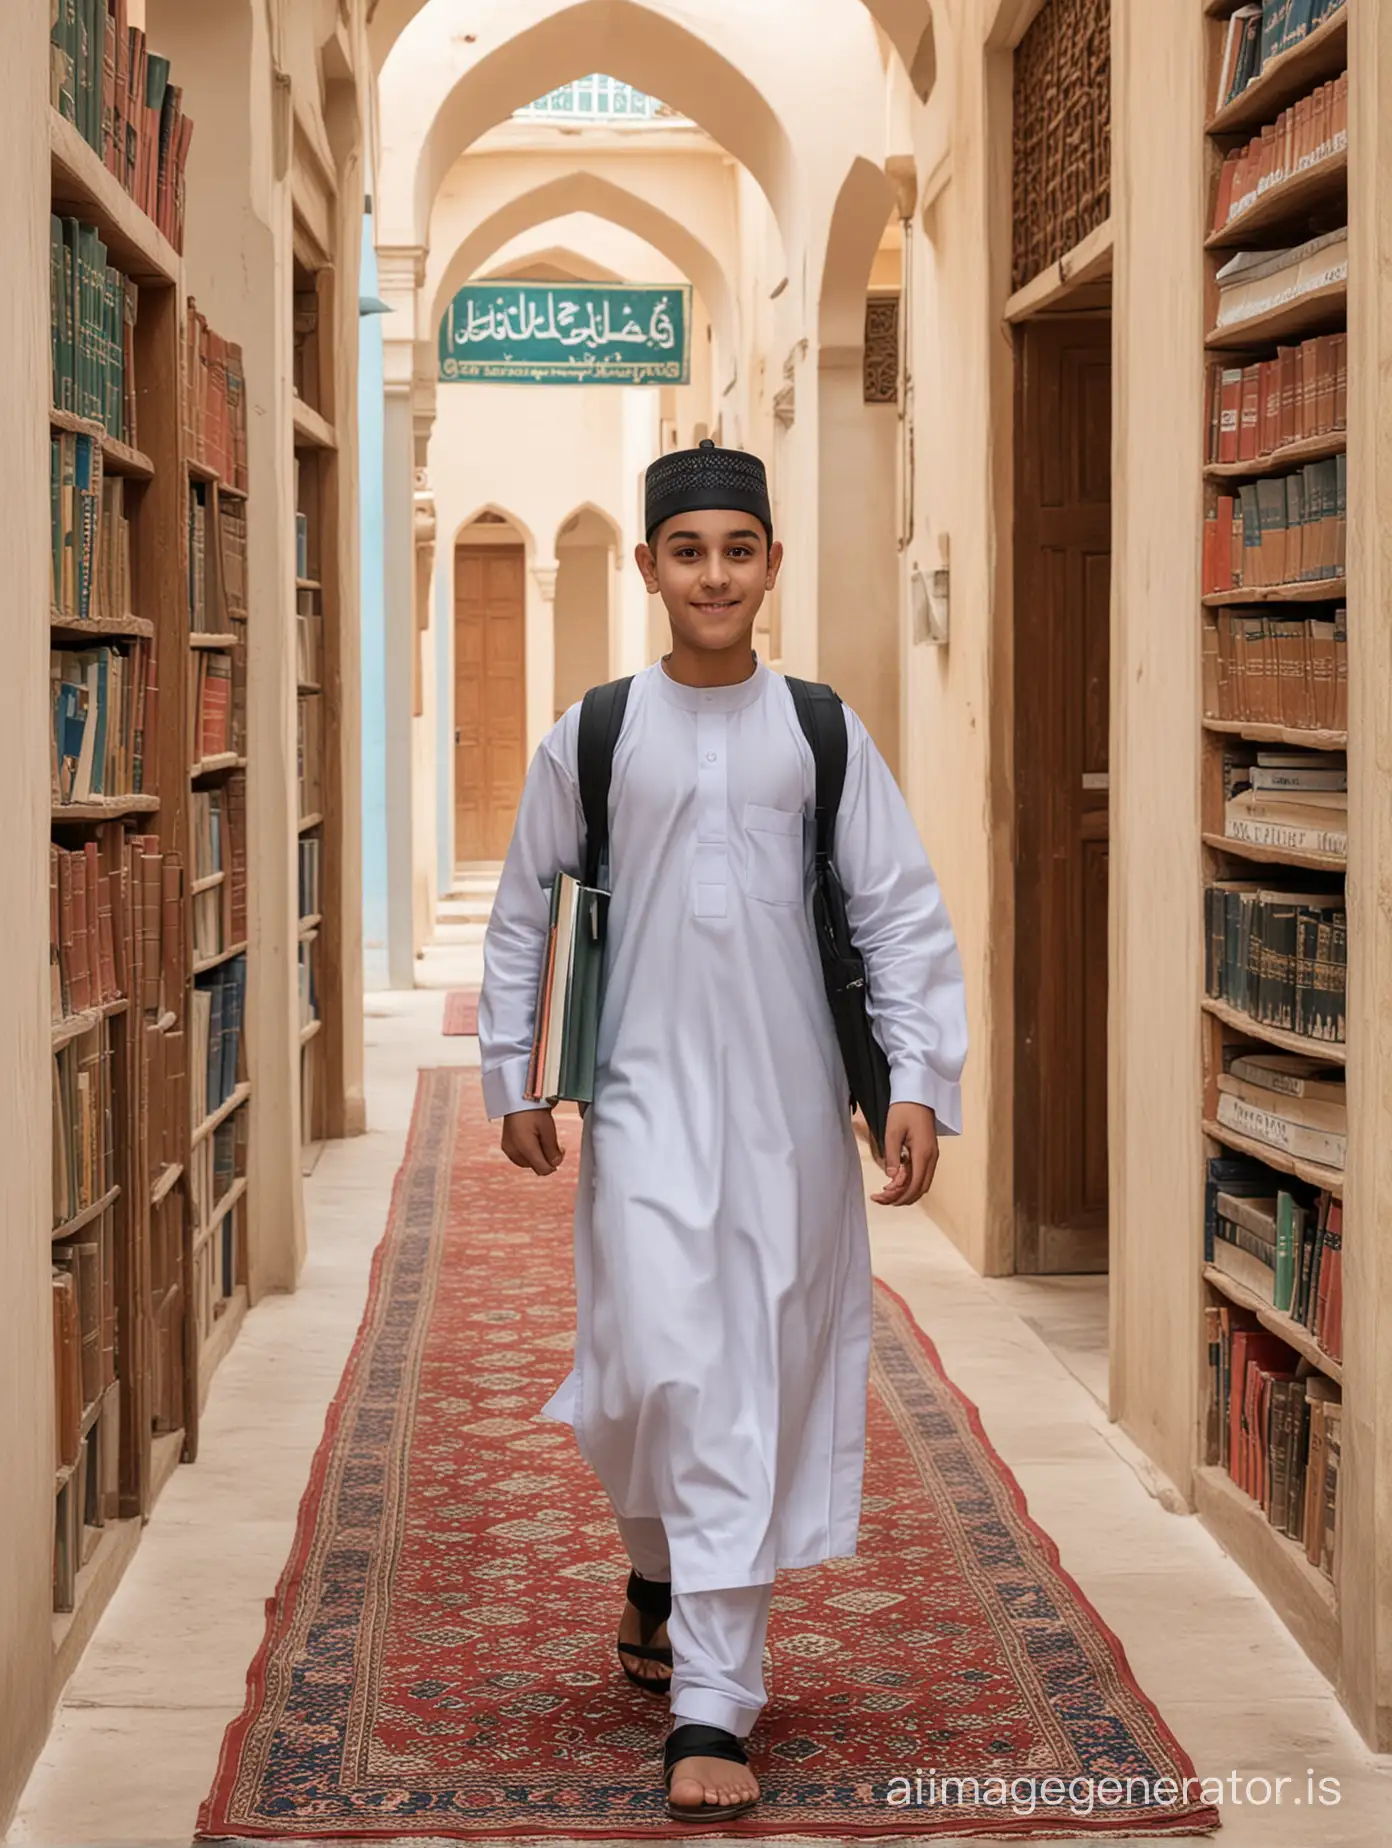 Madrasa-Student-in-Traditional-Jubba-Cap-Carrying-Books